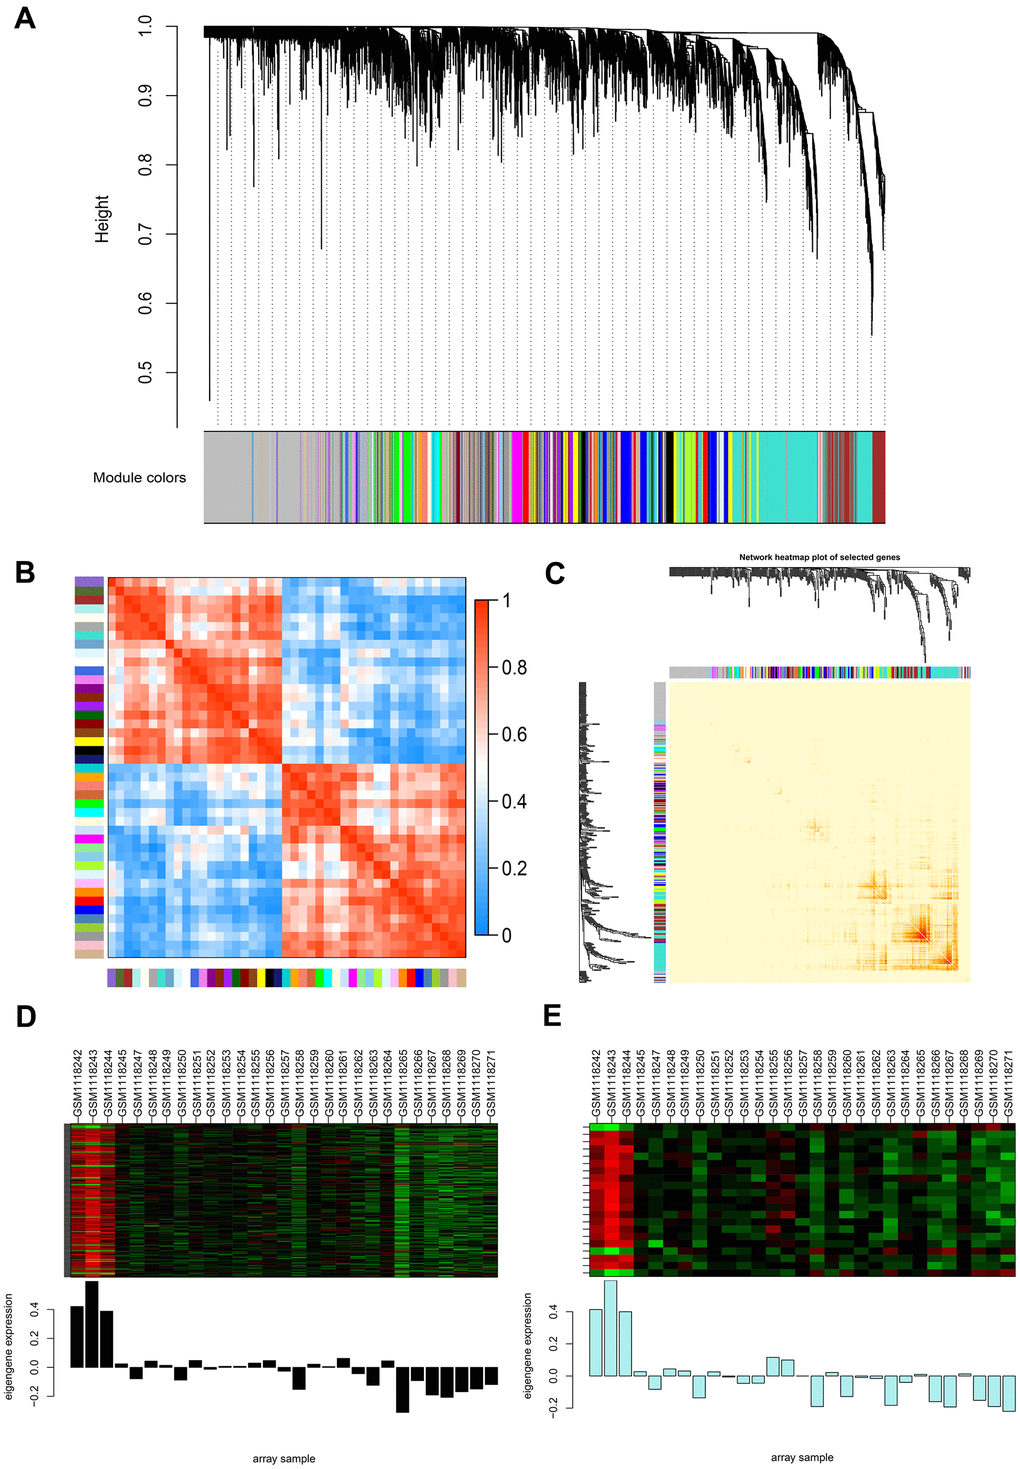 Weighted gene co-expression network analysis (WGCNA) of genes between the control and NOA groups. (A) Hierarchical cluster tree showing co-expression modules identified by WGCNA. The X-axis represents genes in different modules marked with different colors. (B) Heatmap plot of the adjacencies in the eigengene network. Each row and column in the heatmap correspond to one module eigengene (labeled by color). In the heatmap, the blue color represents low adjacency (negative correlation), while red represents high adjacency (positive correlation). Squares of red color along the diagonal are the meta-modules. (C) Heat map plot shows the topological overlap matrix (TOM) among 400 randomly selected genes. Light colors depict a small overlap, and the red color indicates a greater overlap. The left side and the top side show the gene dendrogram and module assignment. (D, E) Two modules with the highest relative rates were selected to localize the hub genes, they are separately colored with black (D) and pale turquoise (E). The Y-axis expressions were normalized by log2(TPM/10+1).